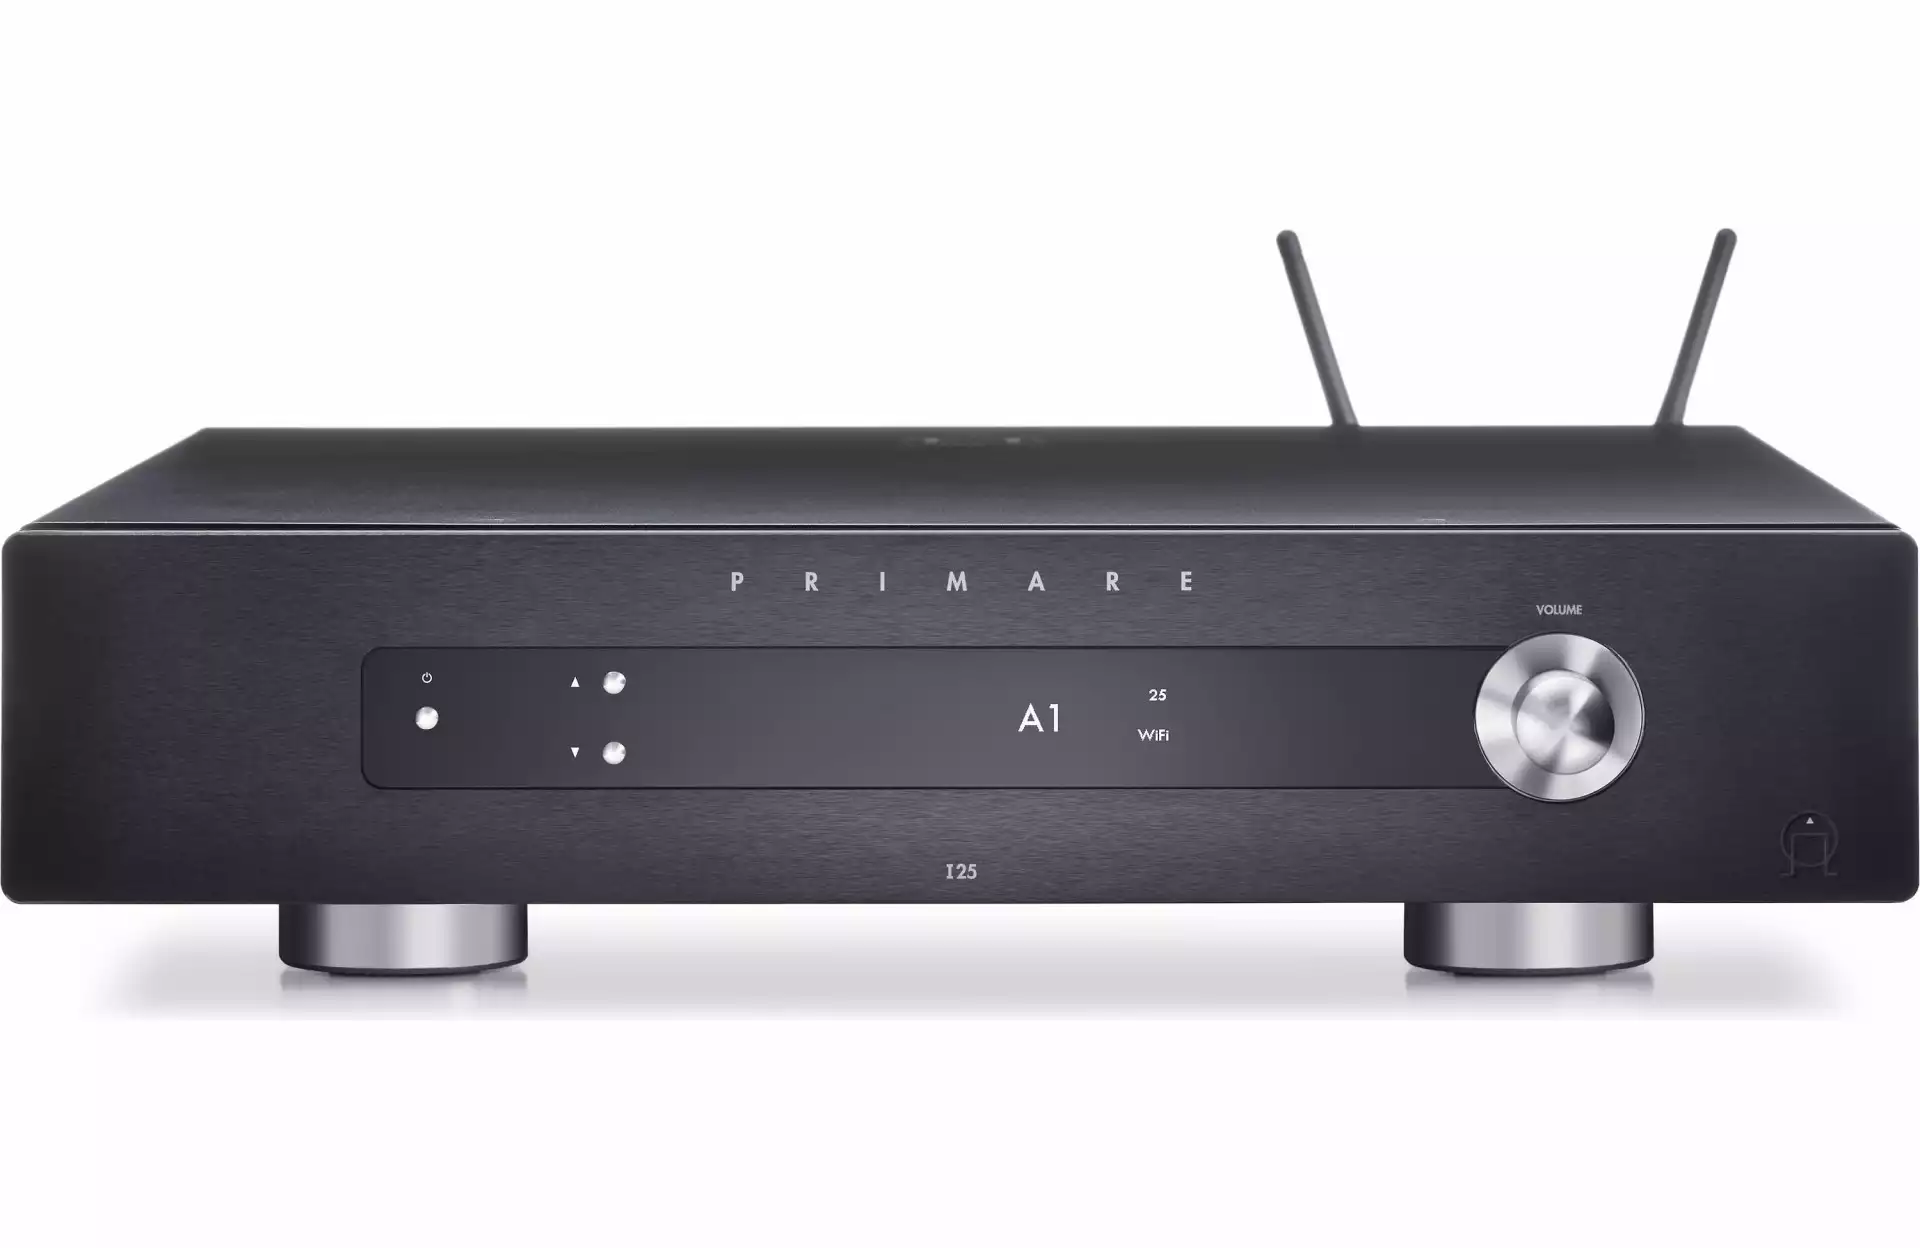 Primare I25 Prisma Stereo integrated amp w/ built-in DAC, Wi-Fi, and Bluetooth Black